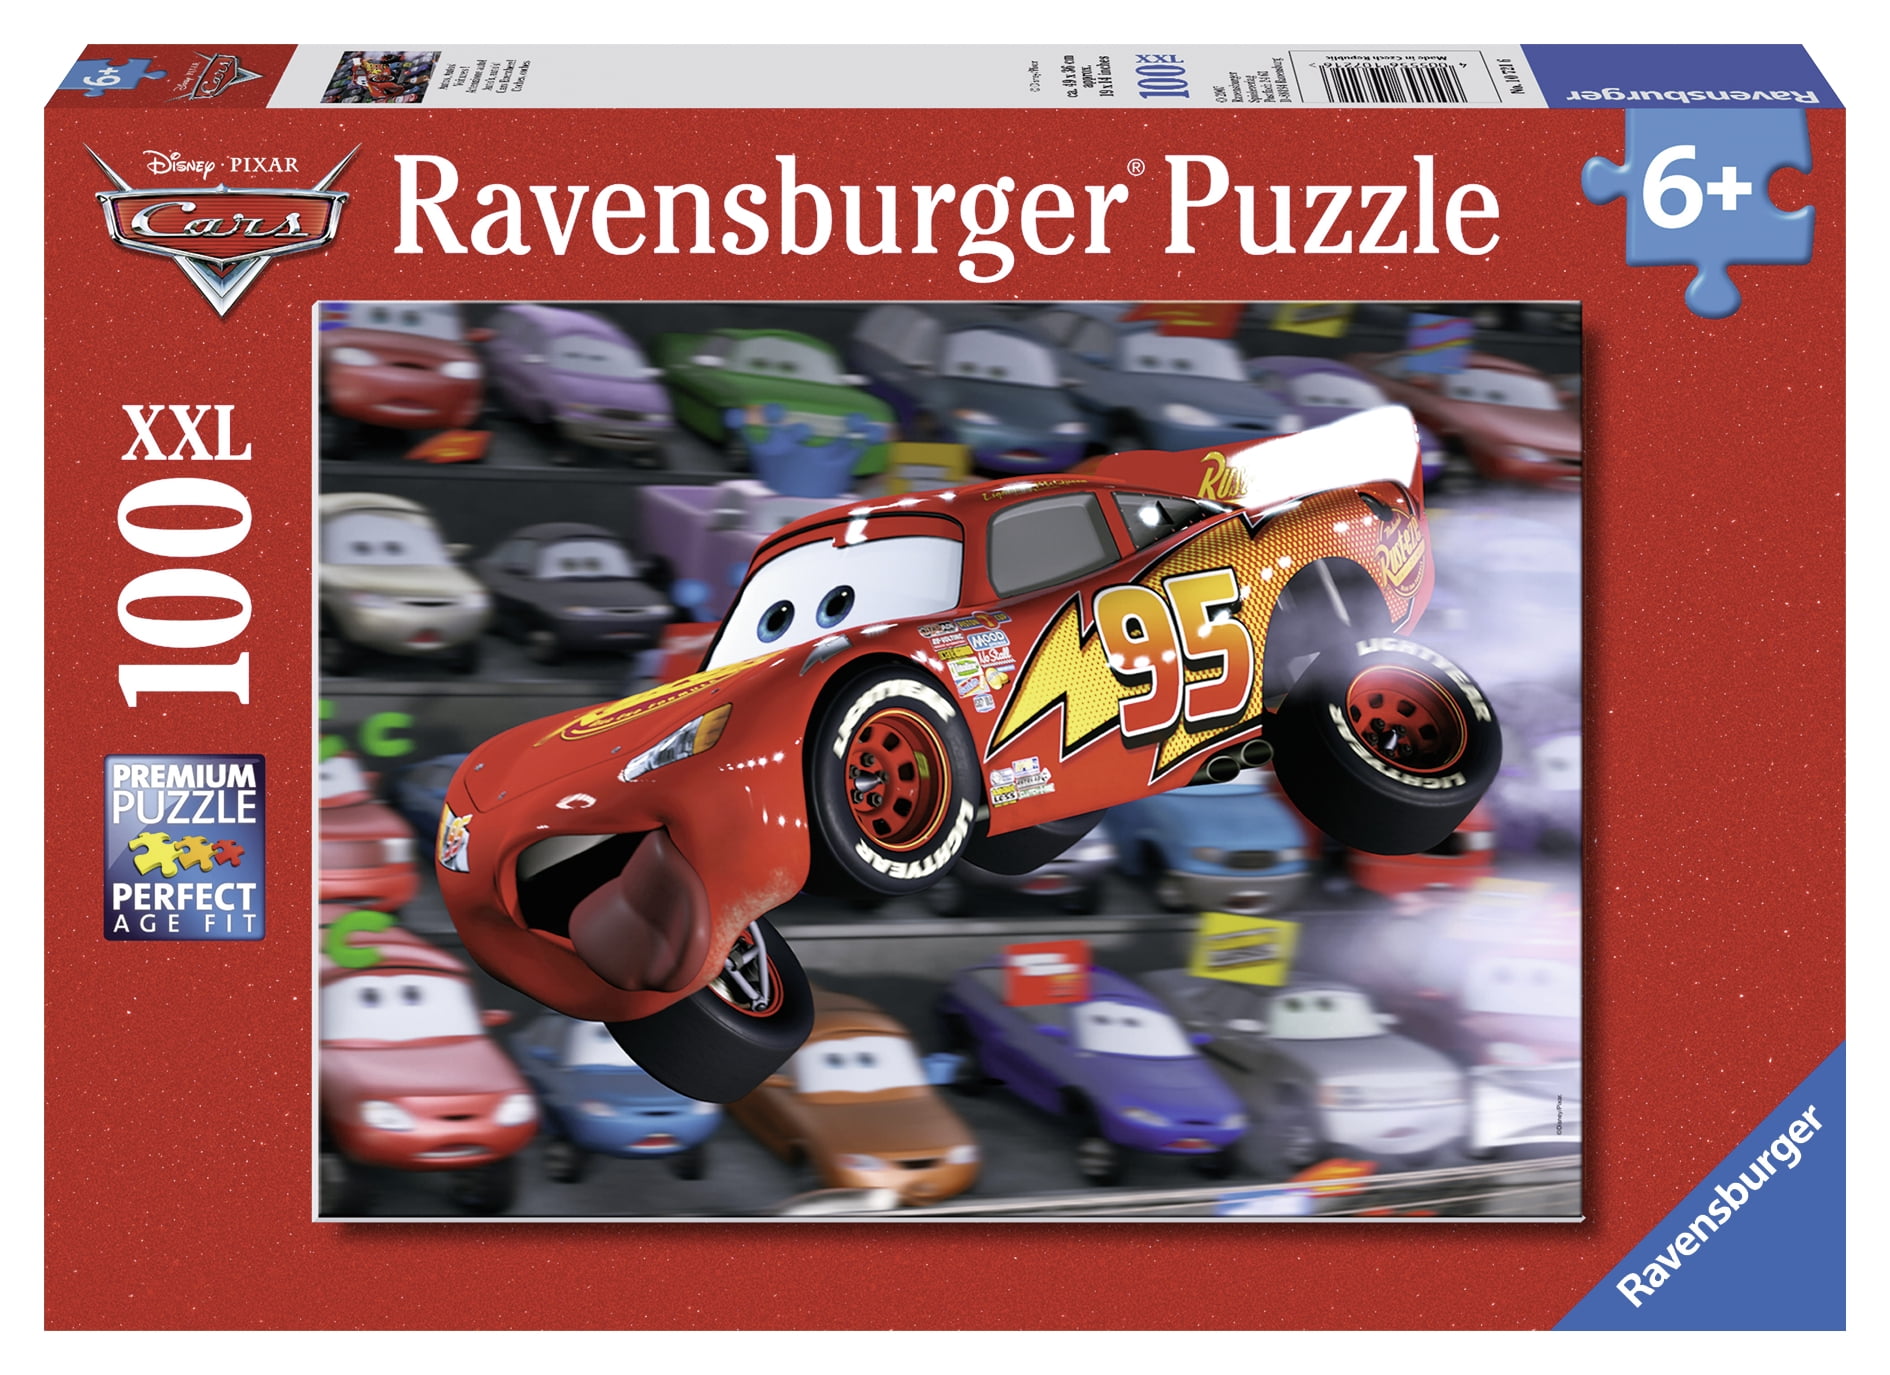 Minions 4 X 100 Jigsaws by Ravensburger 3 Factory VGC for sale online 